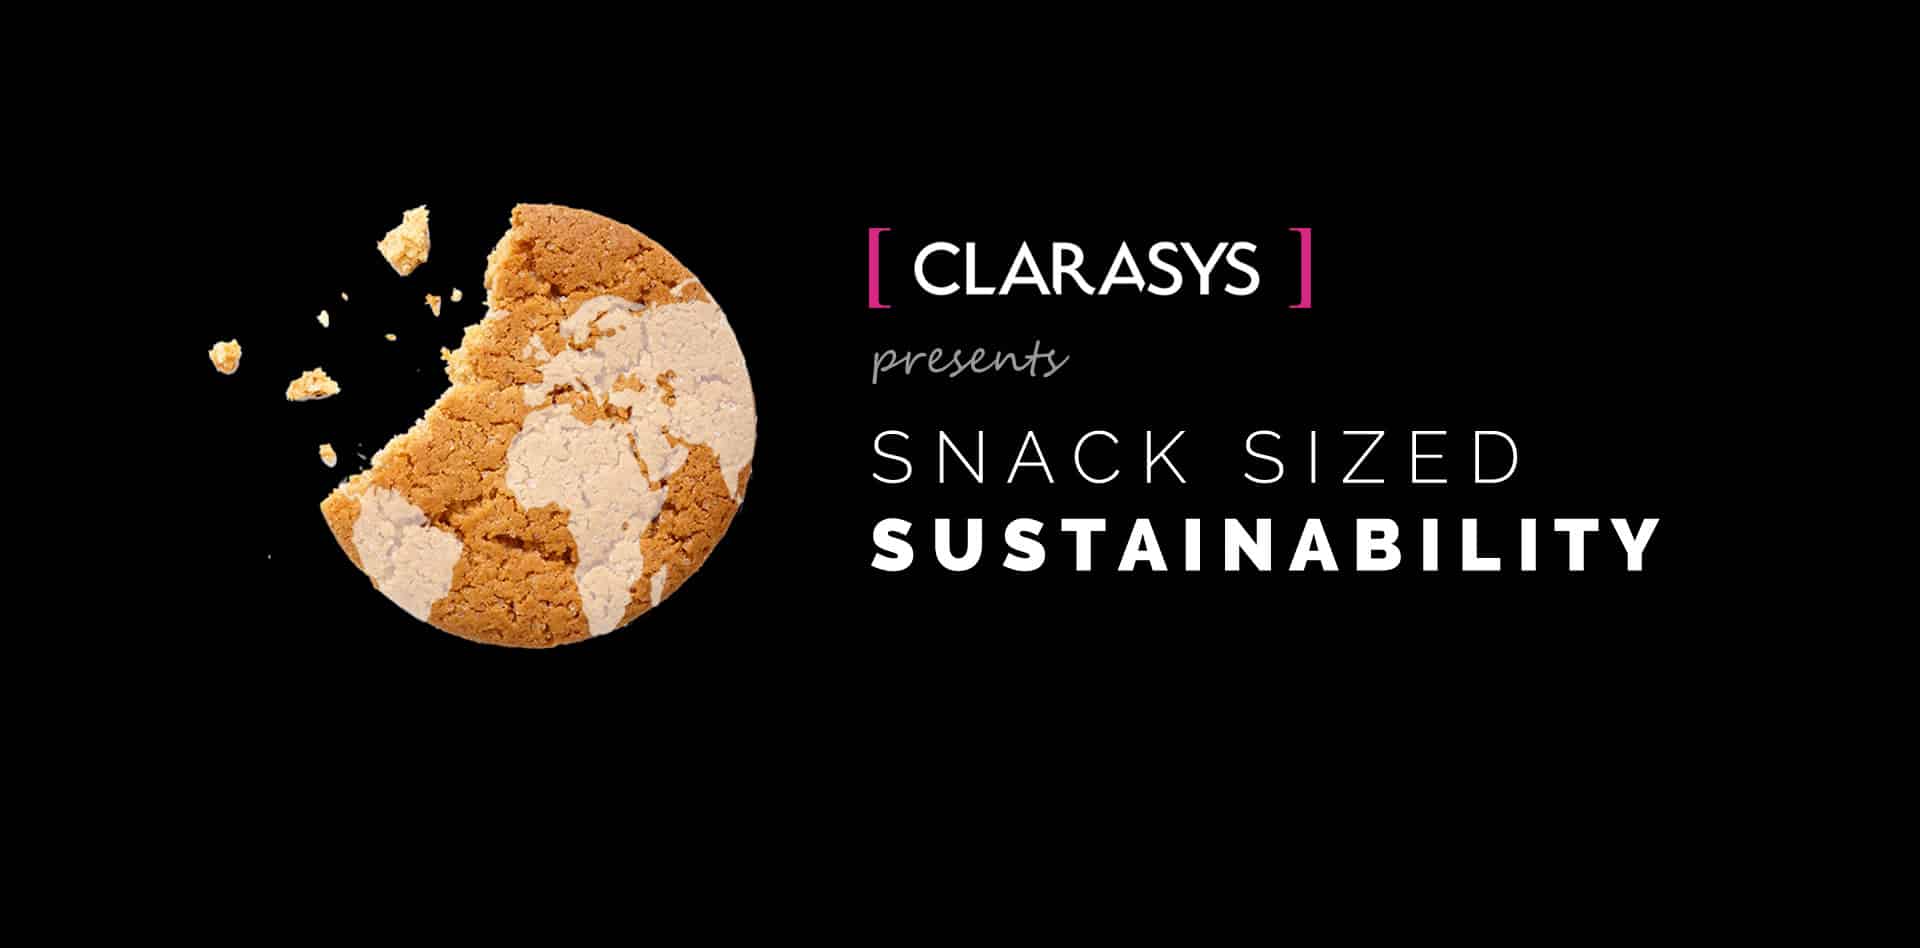 Snack-Sized-Sustainability-final-featured-image-Clarasys